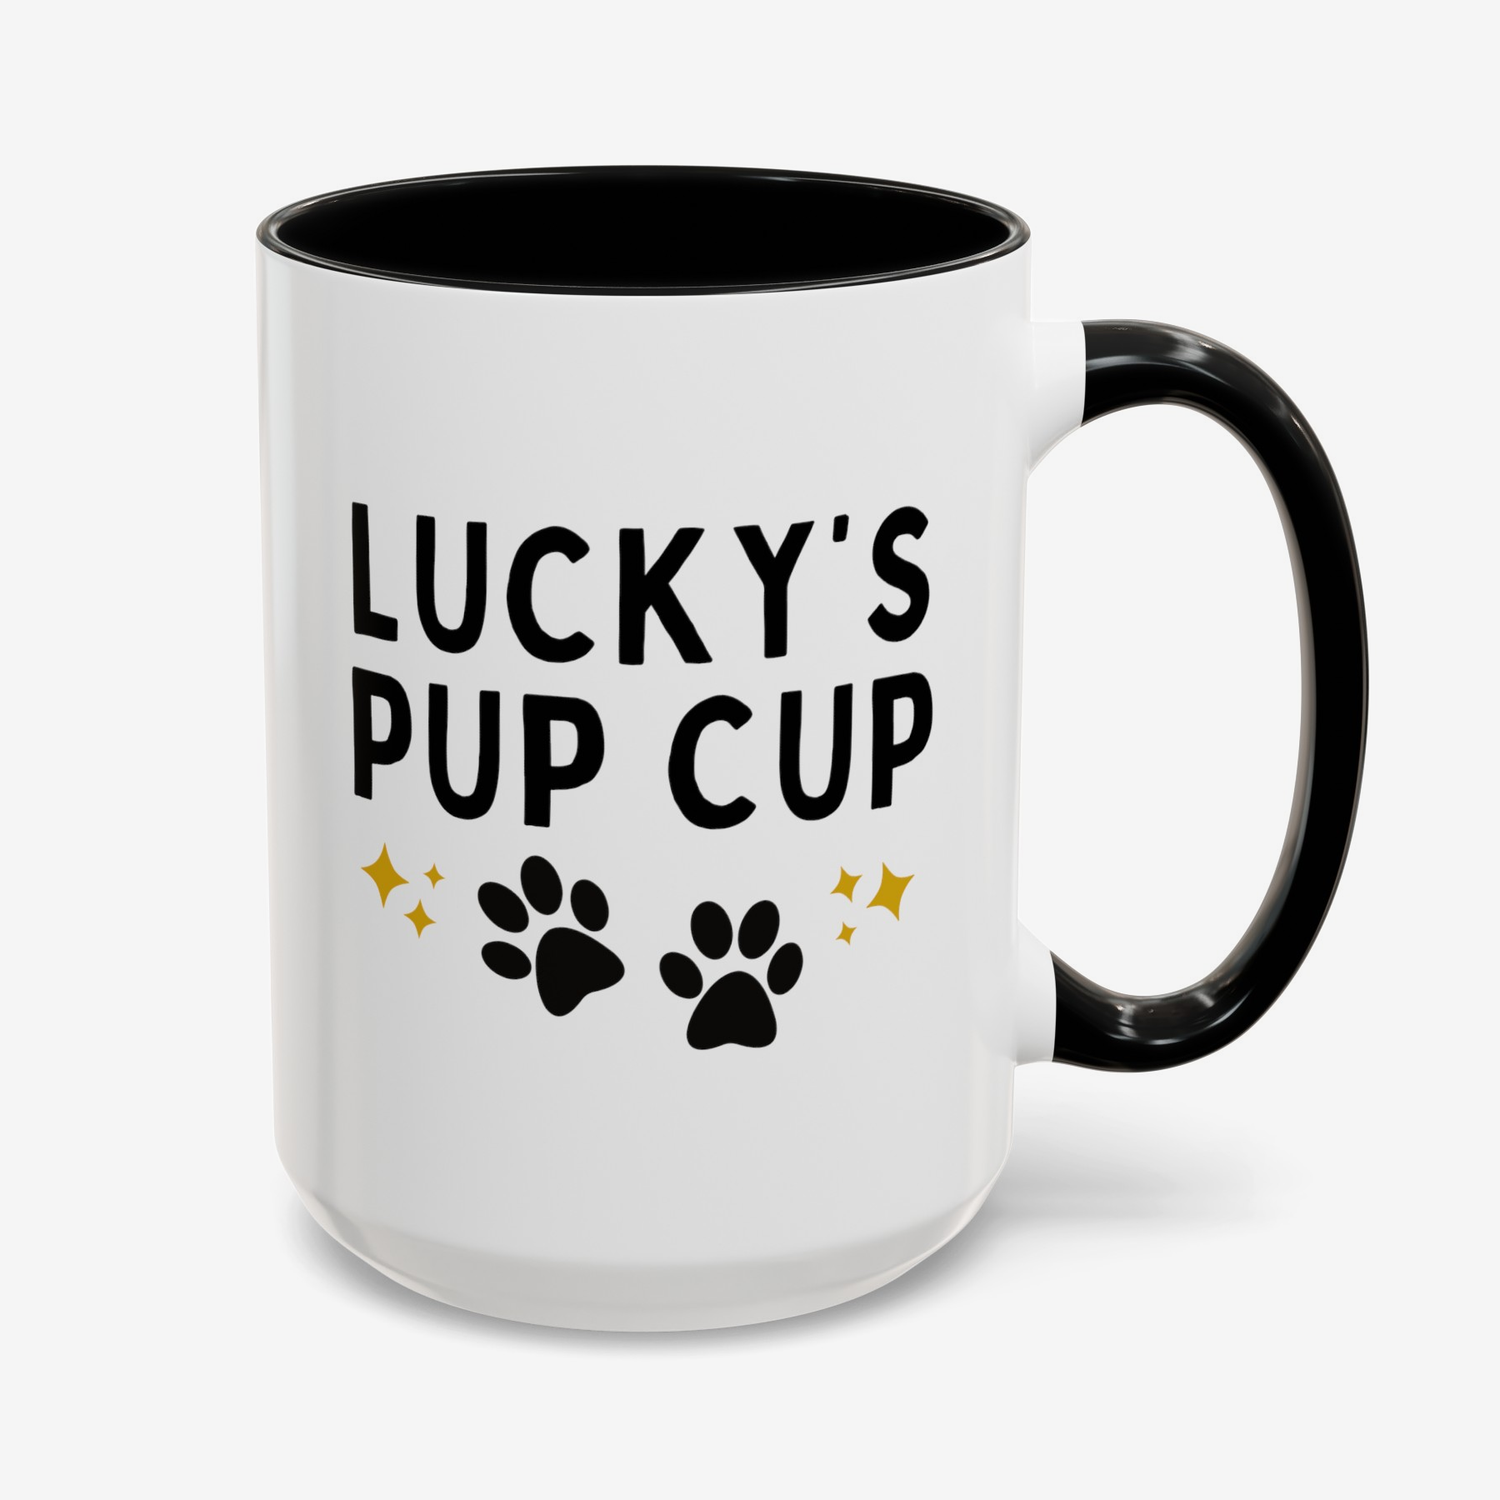 Personalized Pup Cup 15oz white with black accent funny large coffee mug gift for dog mom dad pet puppuccino custom name cute furdad furmom furparent waveywares wavey wares wavywares wavy wares cover